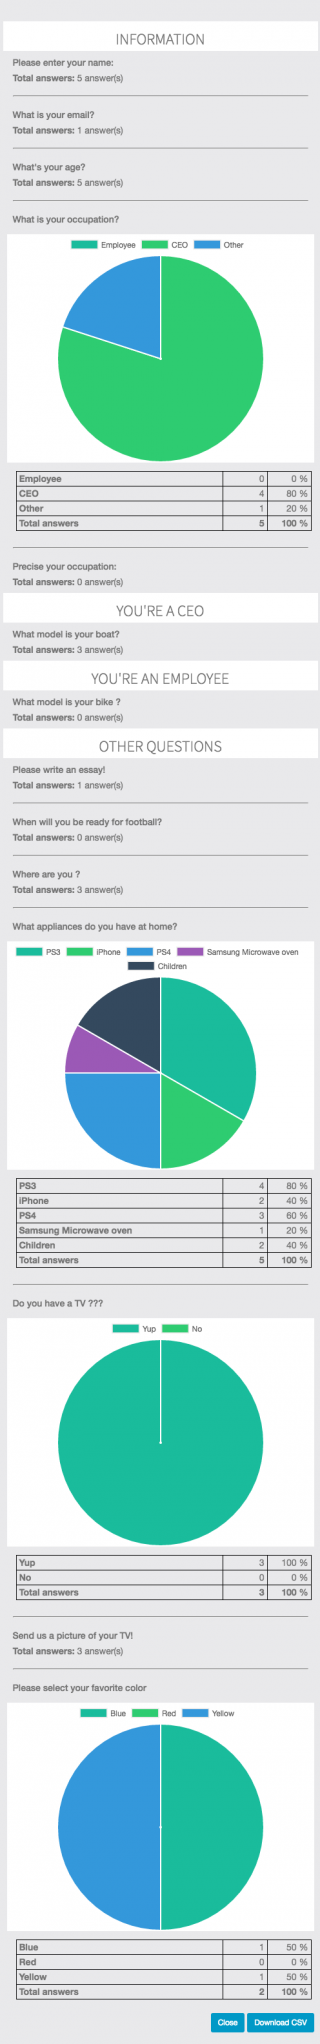 survey_results_view_01-320x2044